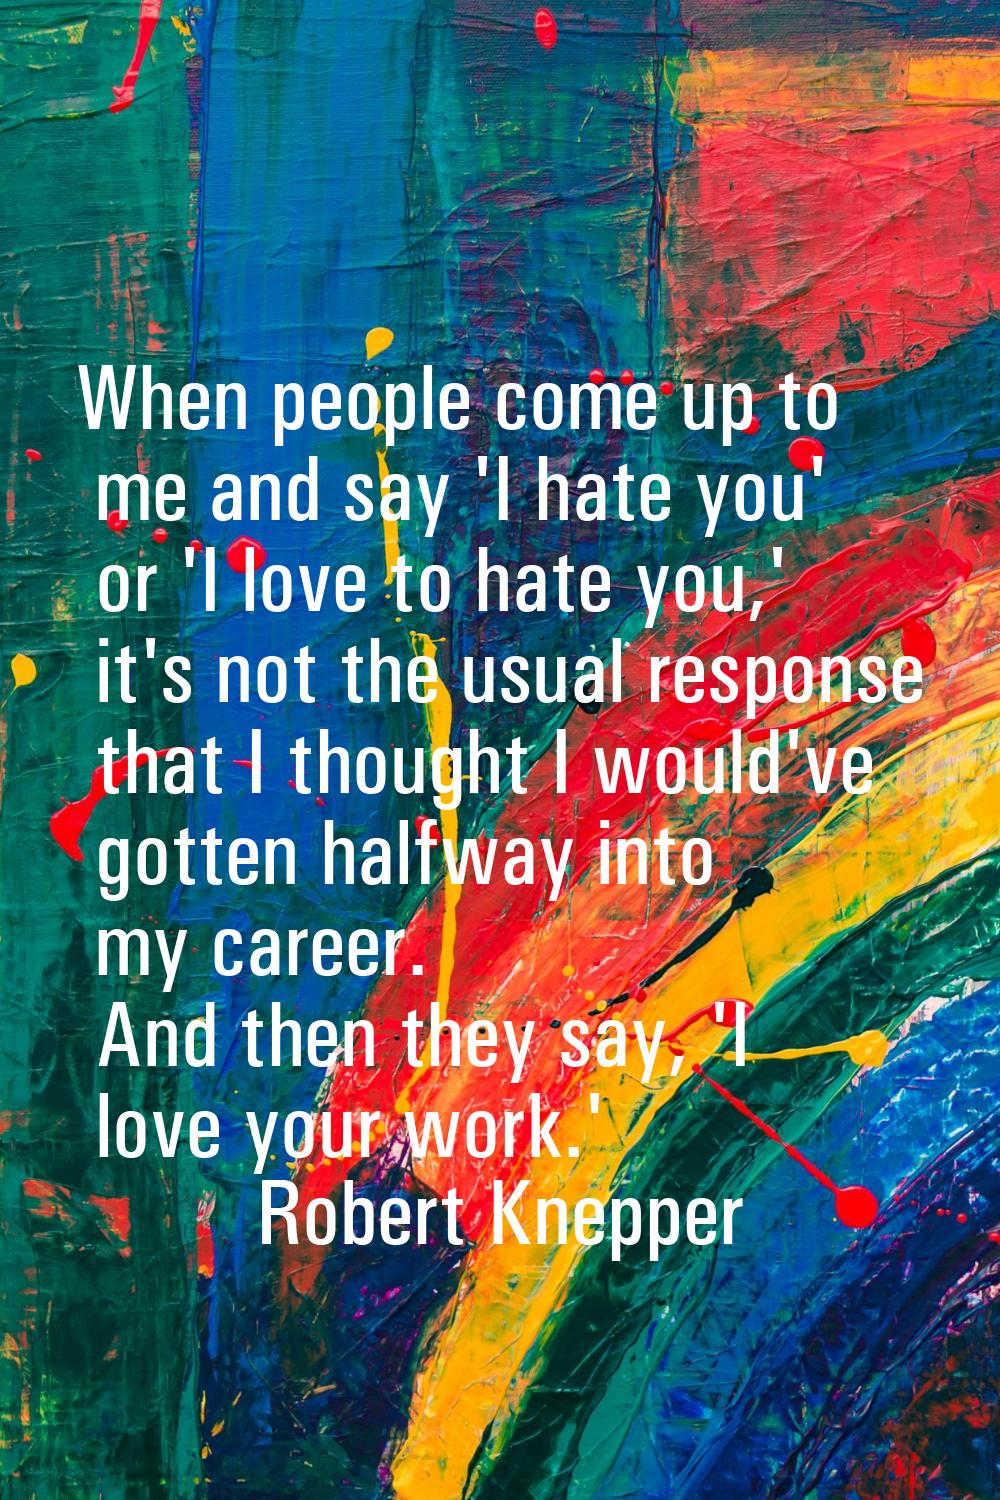 When people come up to me and say 'I hate you' or 'I love to hate you,' it's not the usual response